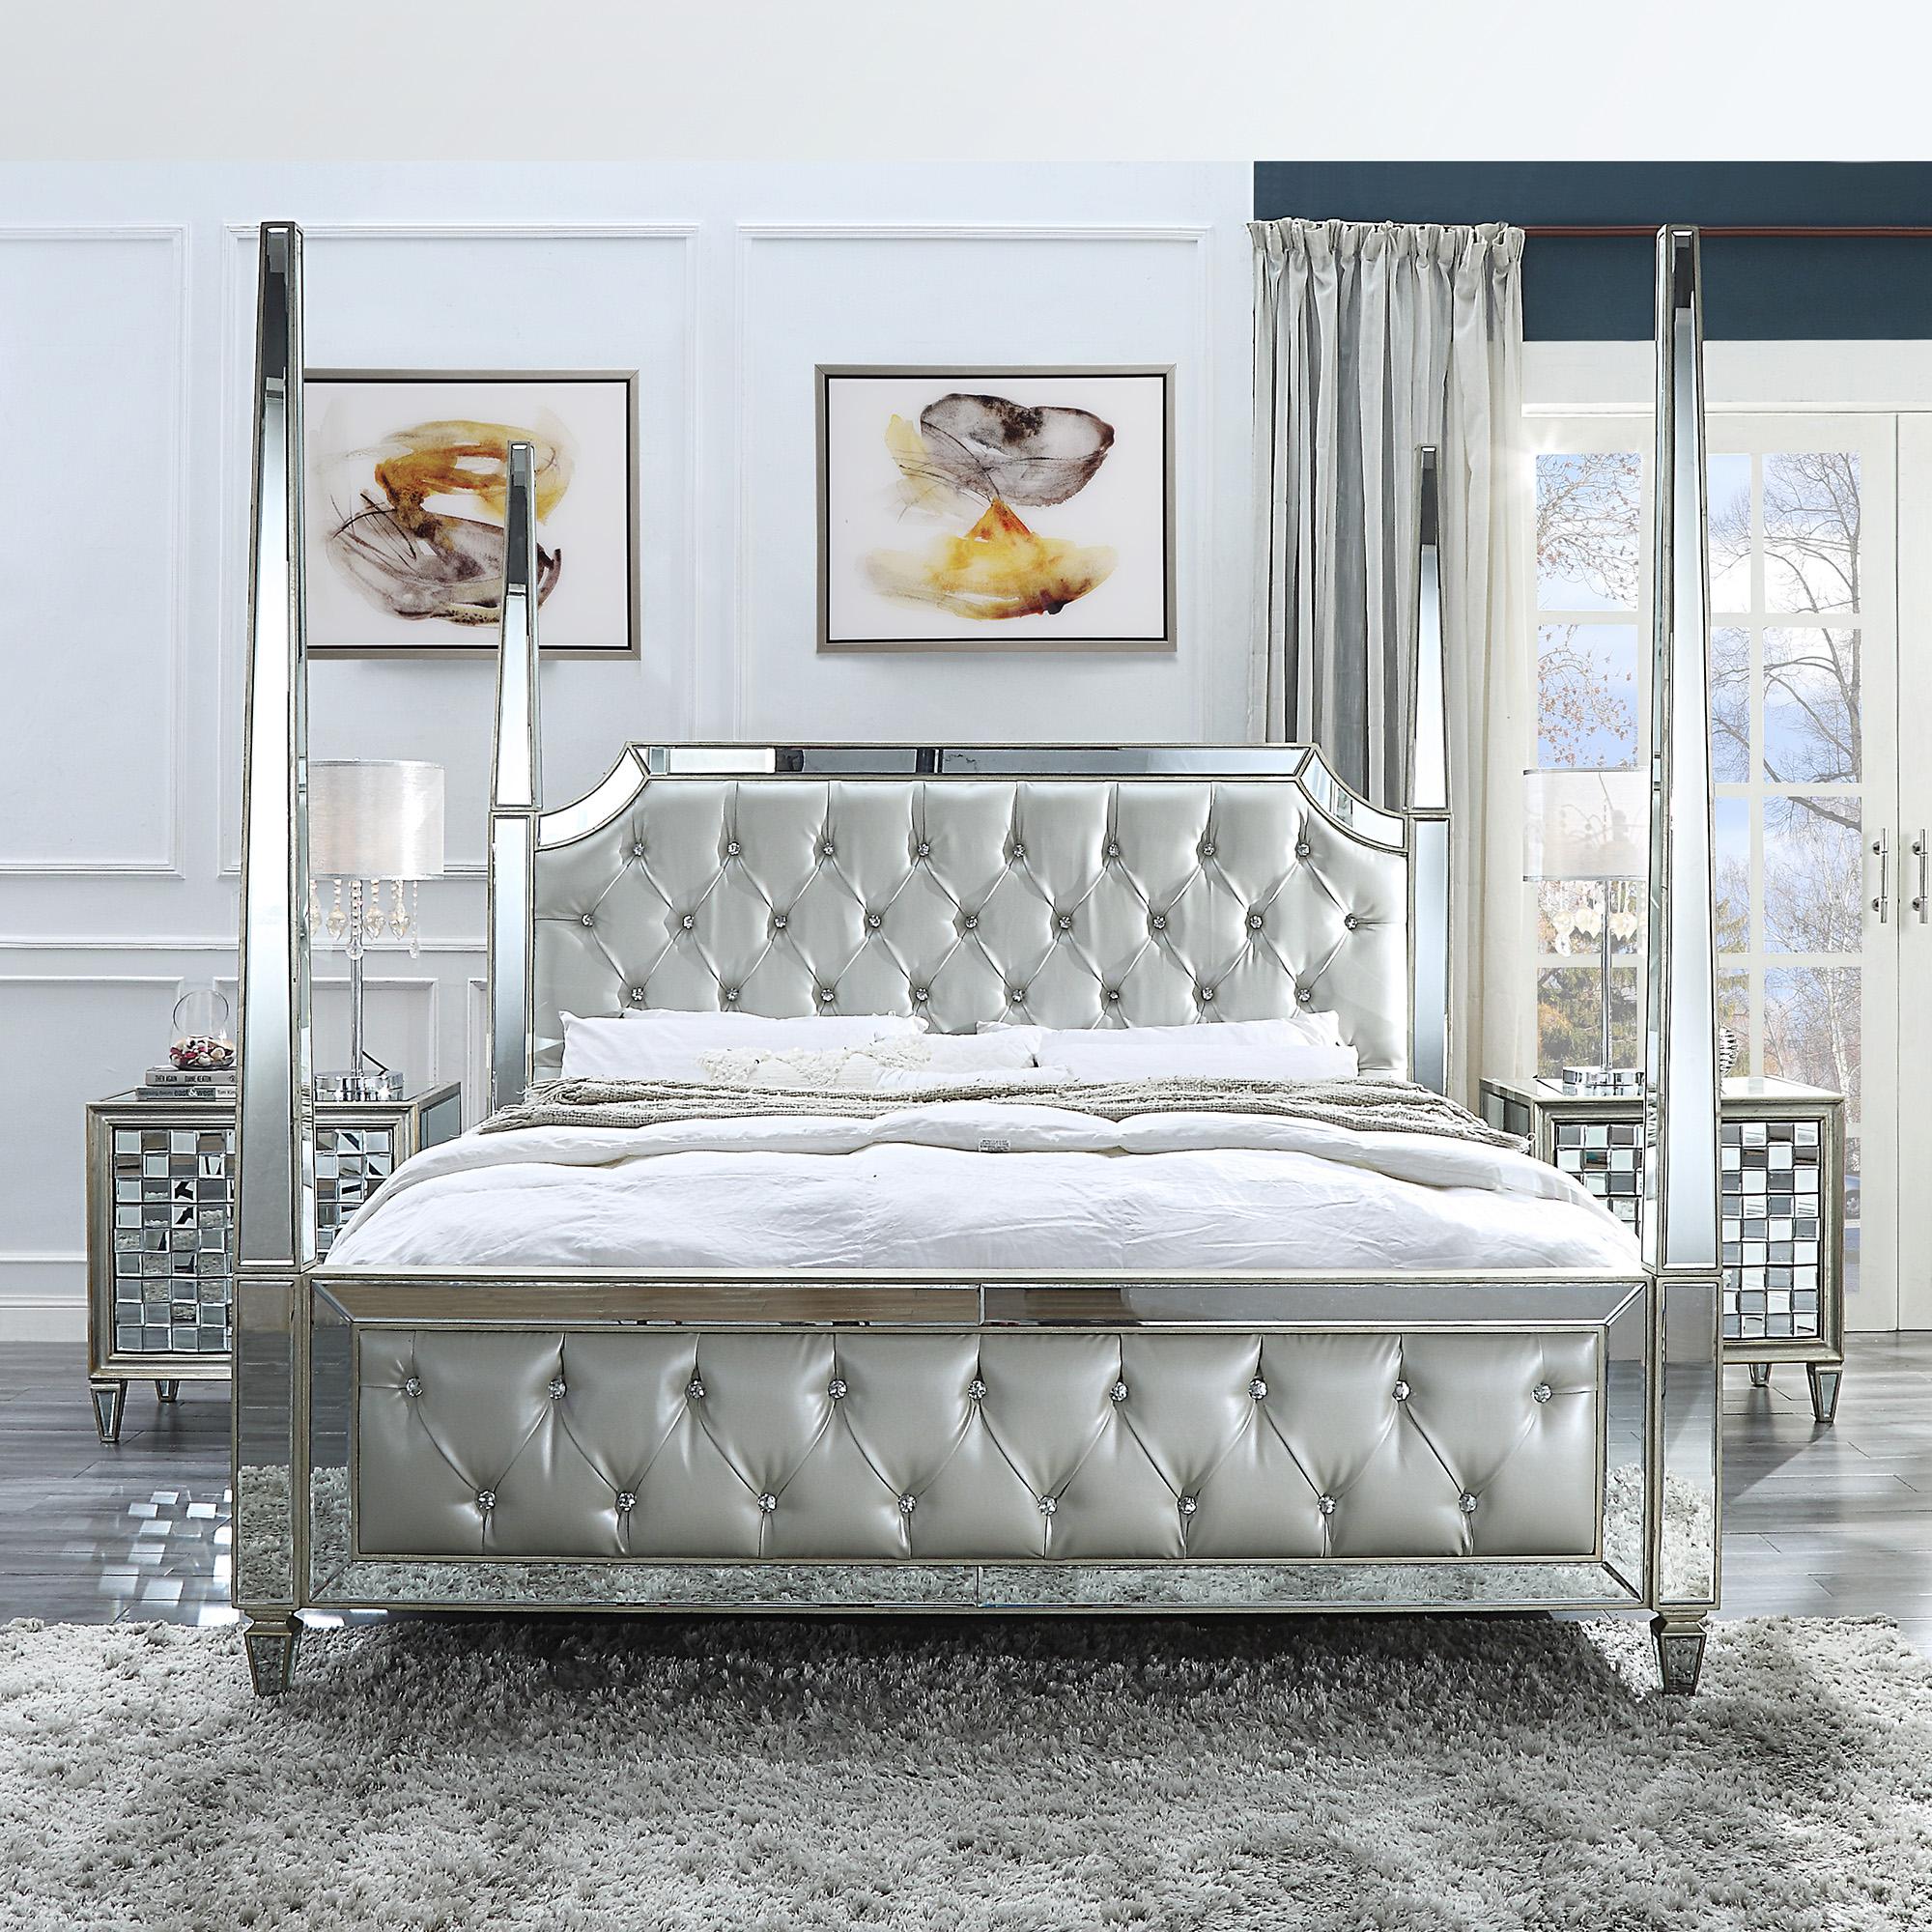 

    
Silver & Mirror King Canopy Bed Modern Homey Design HD-6001
